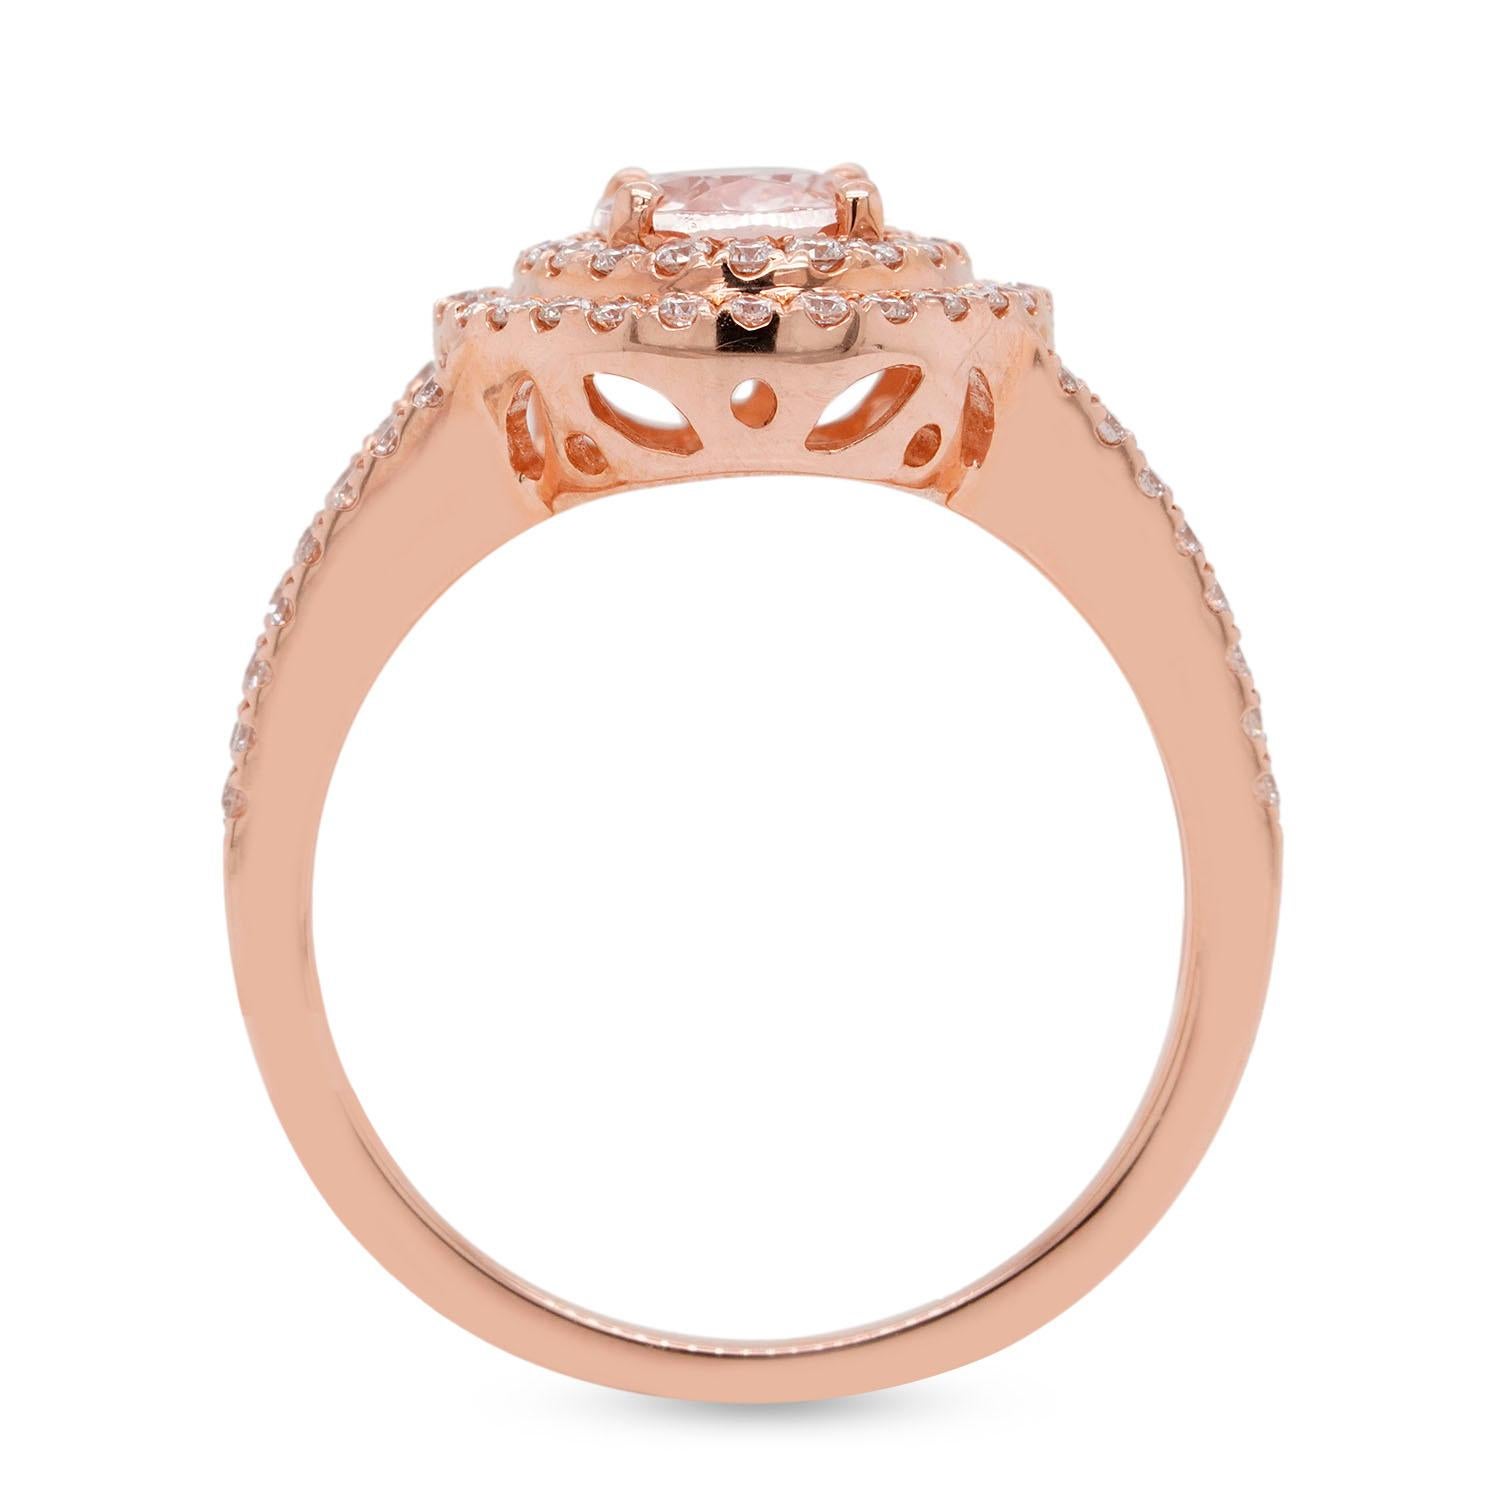 Introducing our stunning 0.93ct Morganite Double Halo Ring, the perfect balance of beauty and elegance. This ring is crafted with precision and care, featuring a beautiful oval-shaped morganite gemstone in the center, surrounded by not just one, but